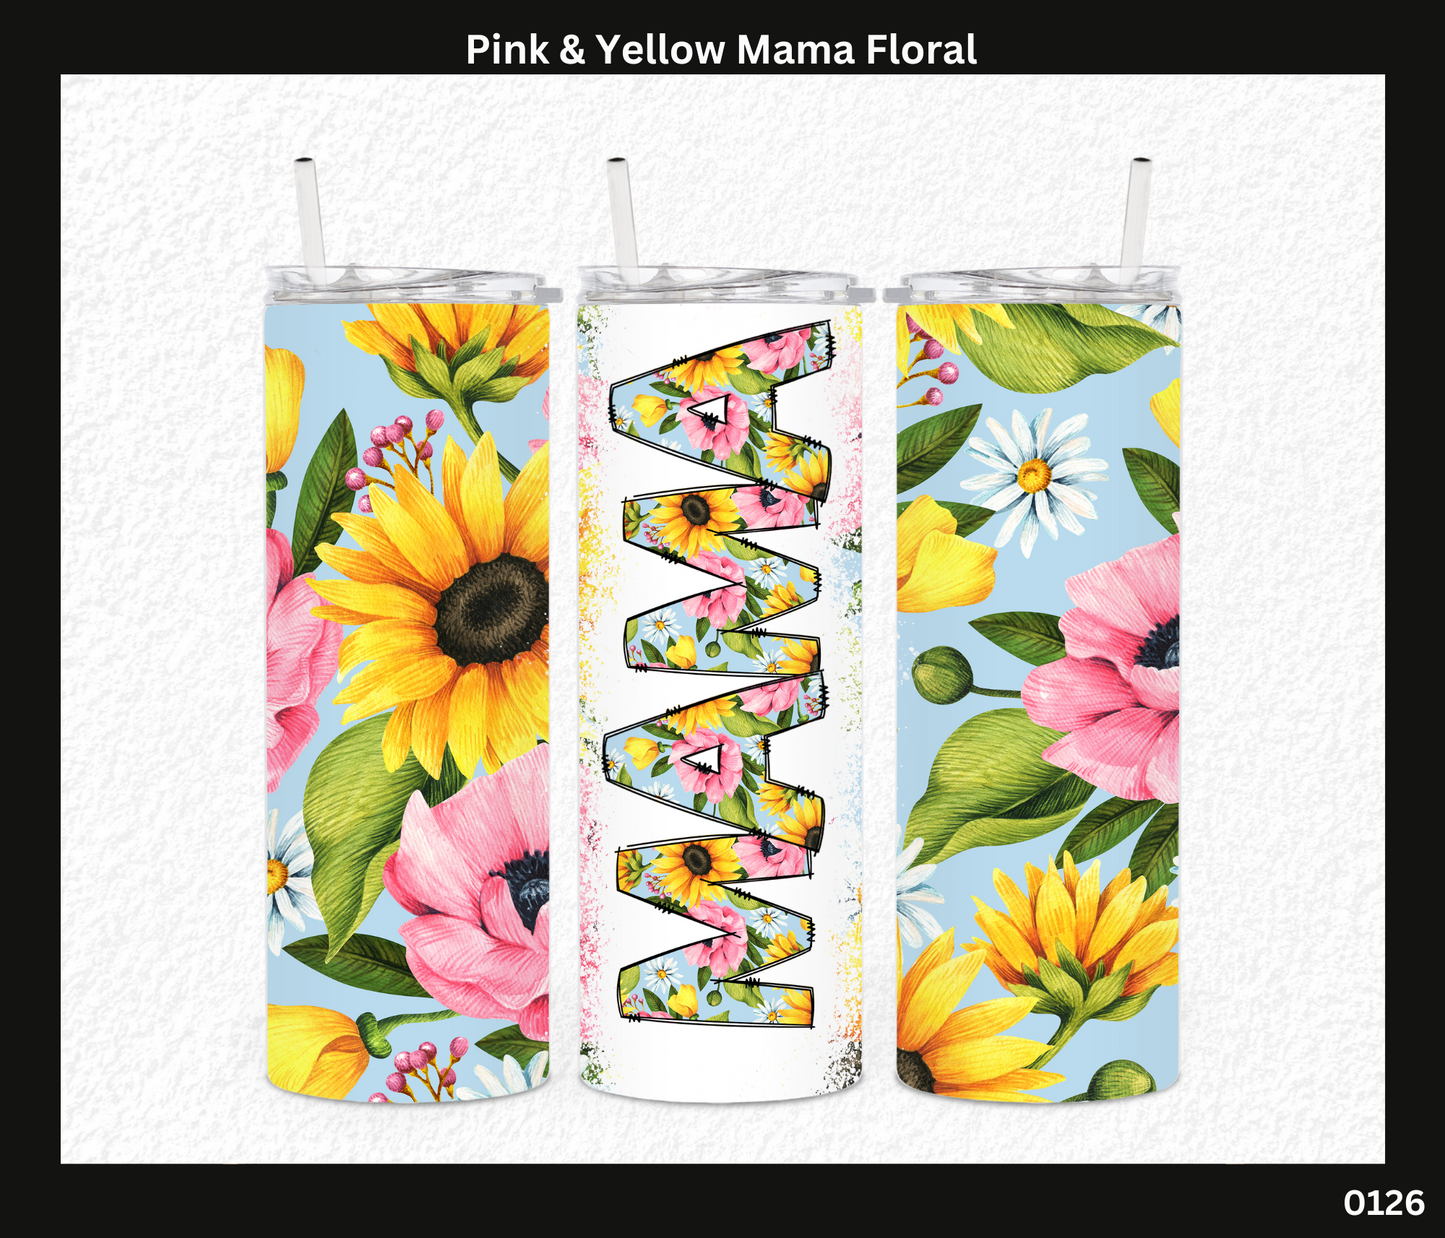 Pink & Yellow Floral Mama